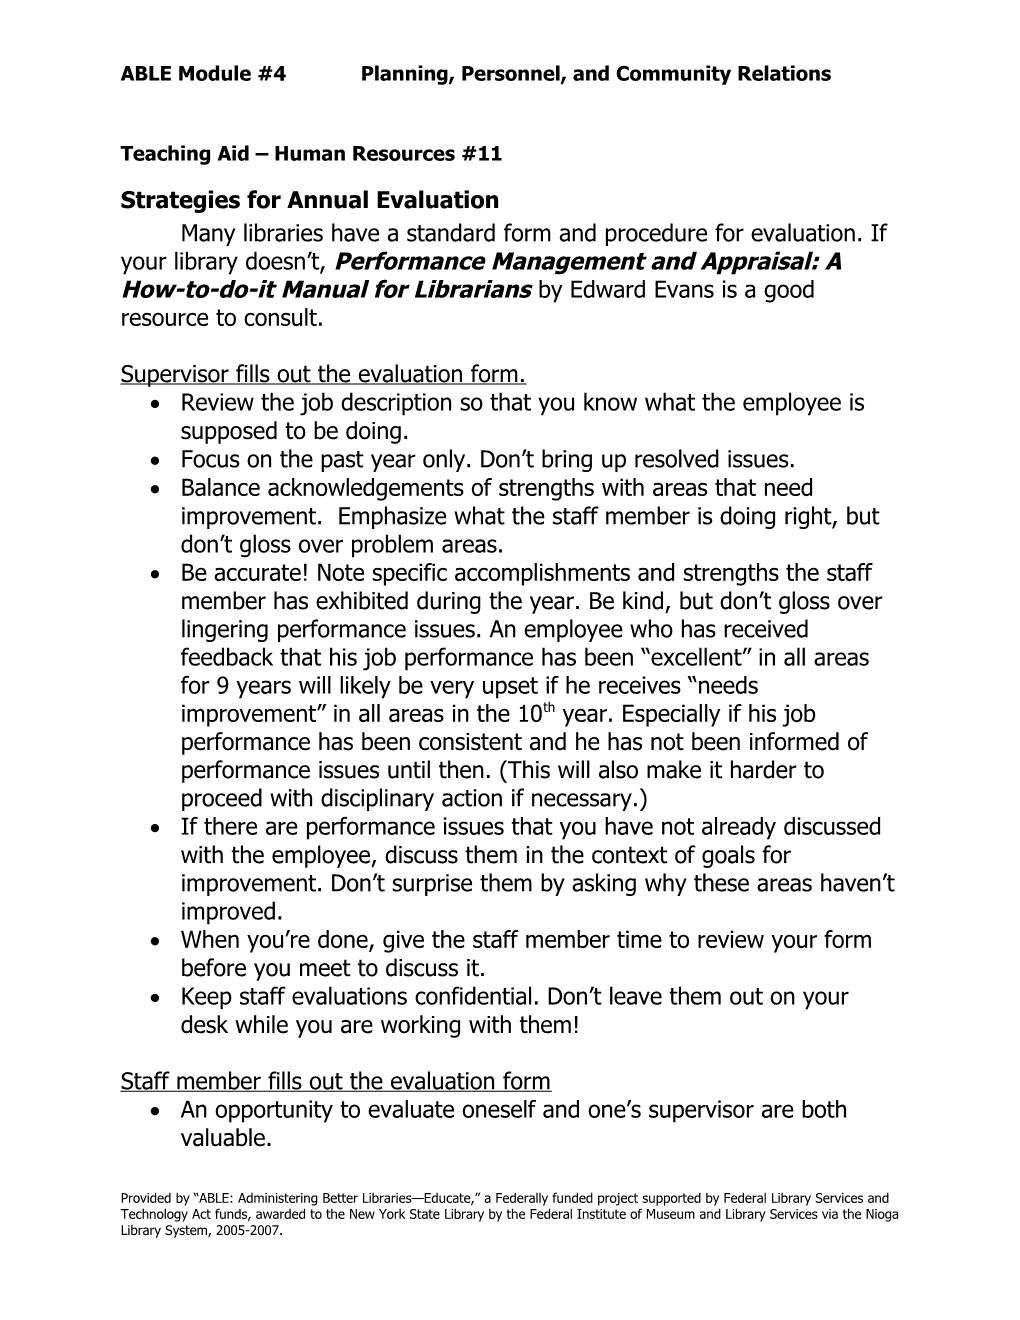 Strategies for Annual Evaluation